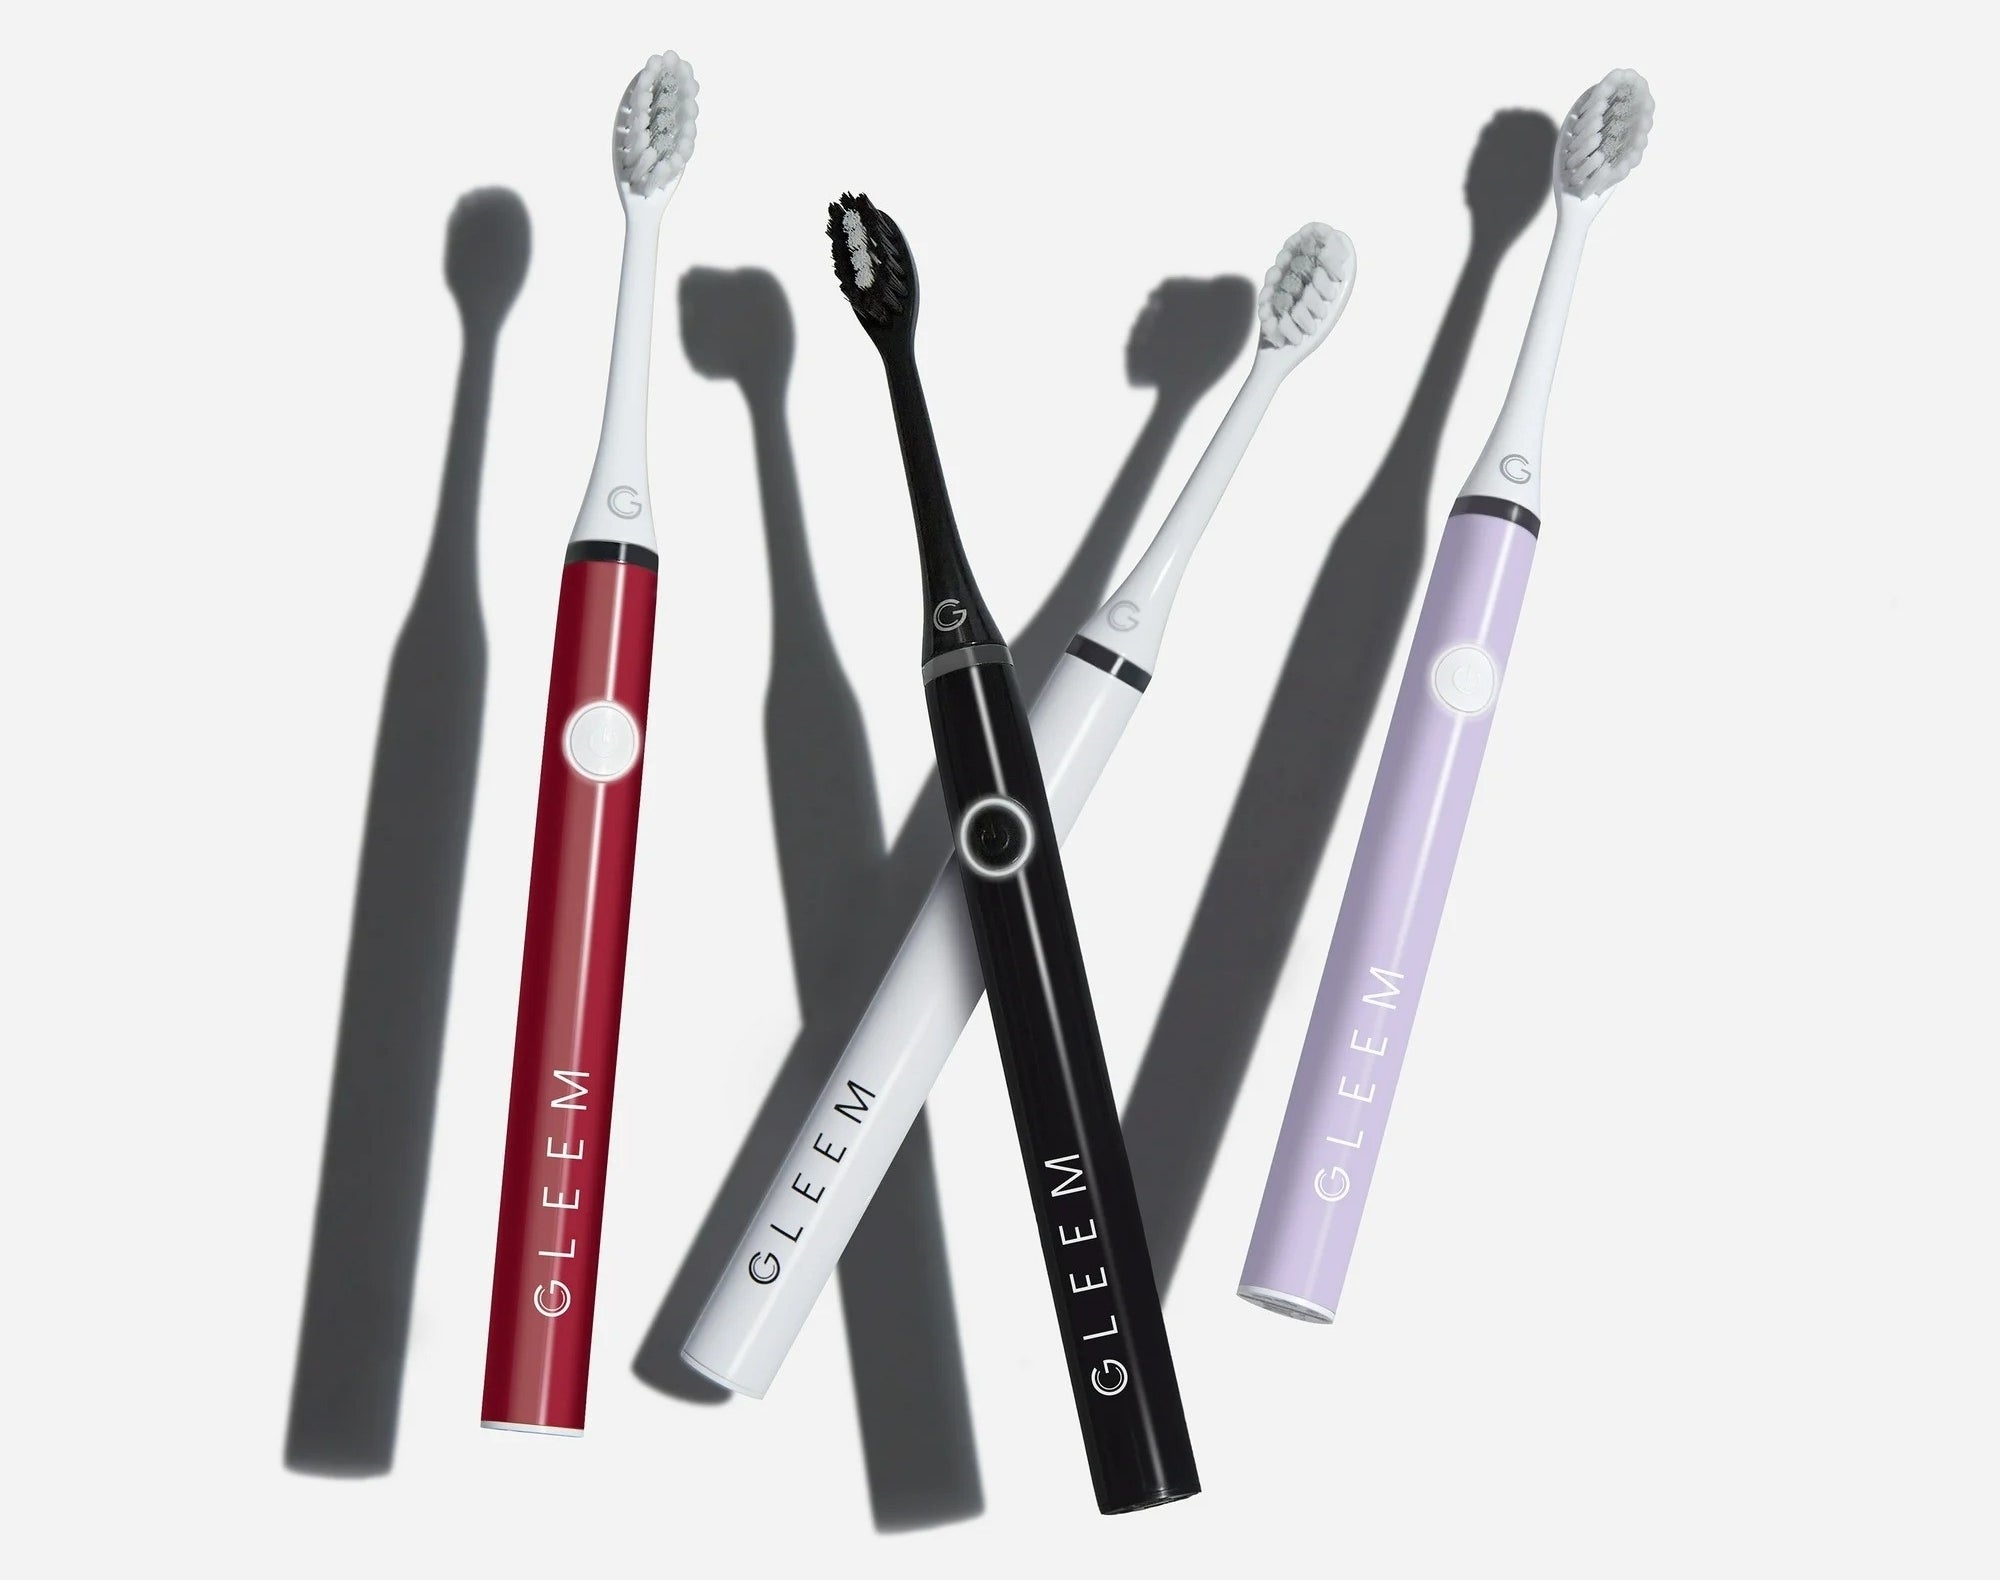 Four sleek electric toothbrushes in different colors